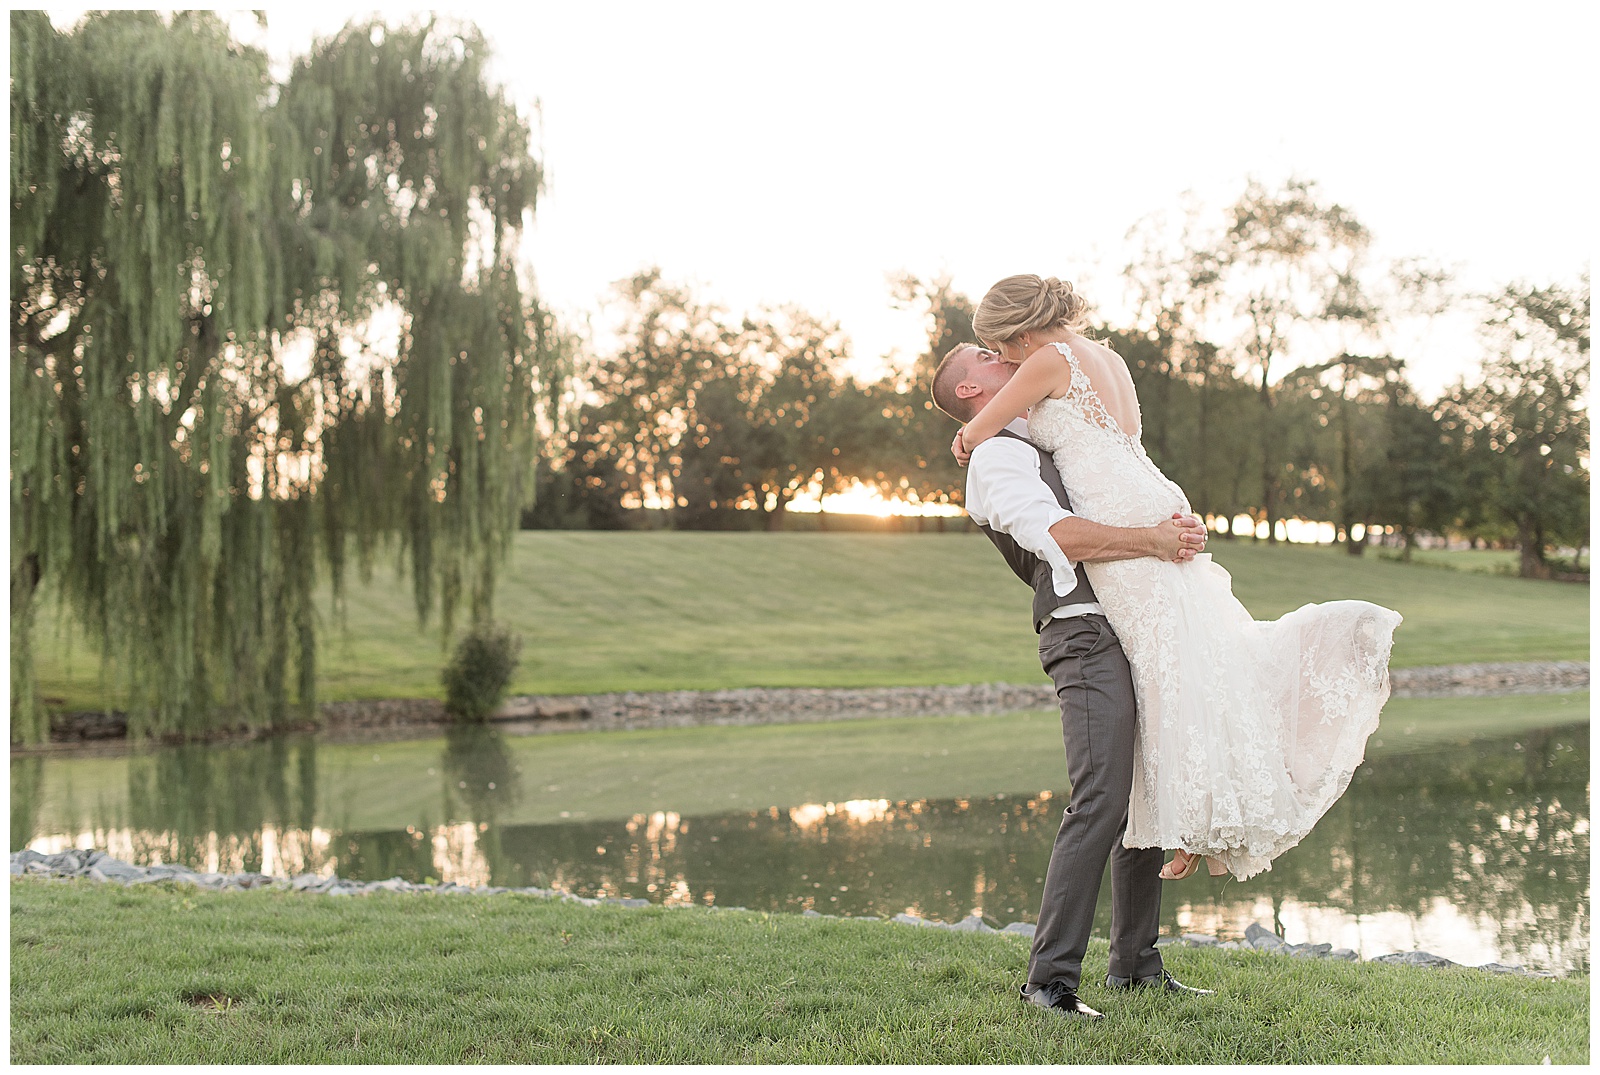 the couple is on the right side of the photo with the pond and trees and sunset behind them as the groom is on the left and is lifting the bride off the ground while they kiss each other at Lakefield Weddings in Manheim, PA